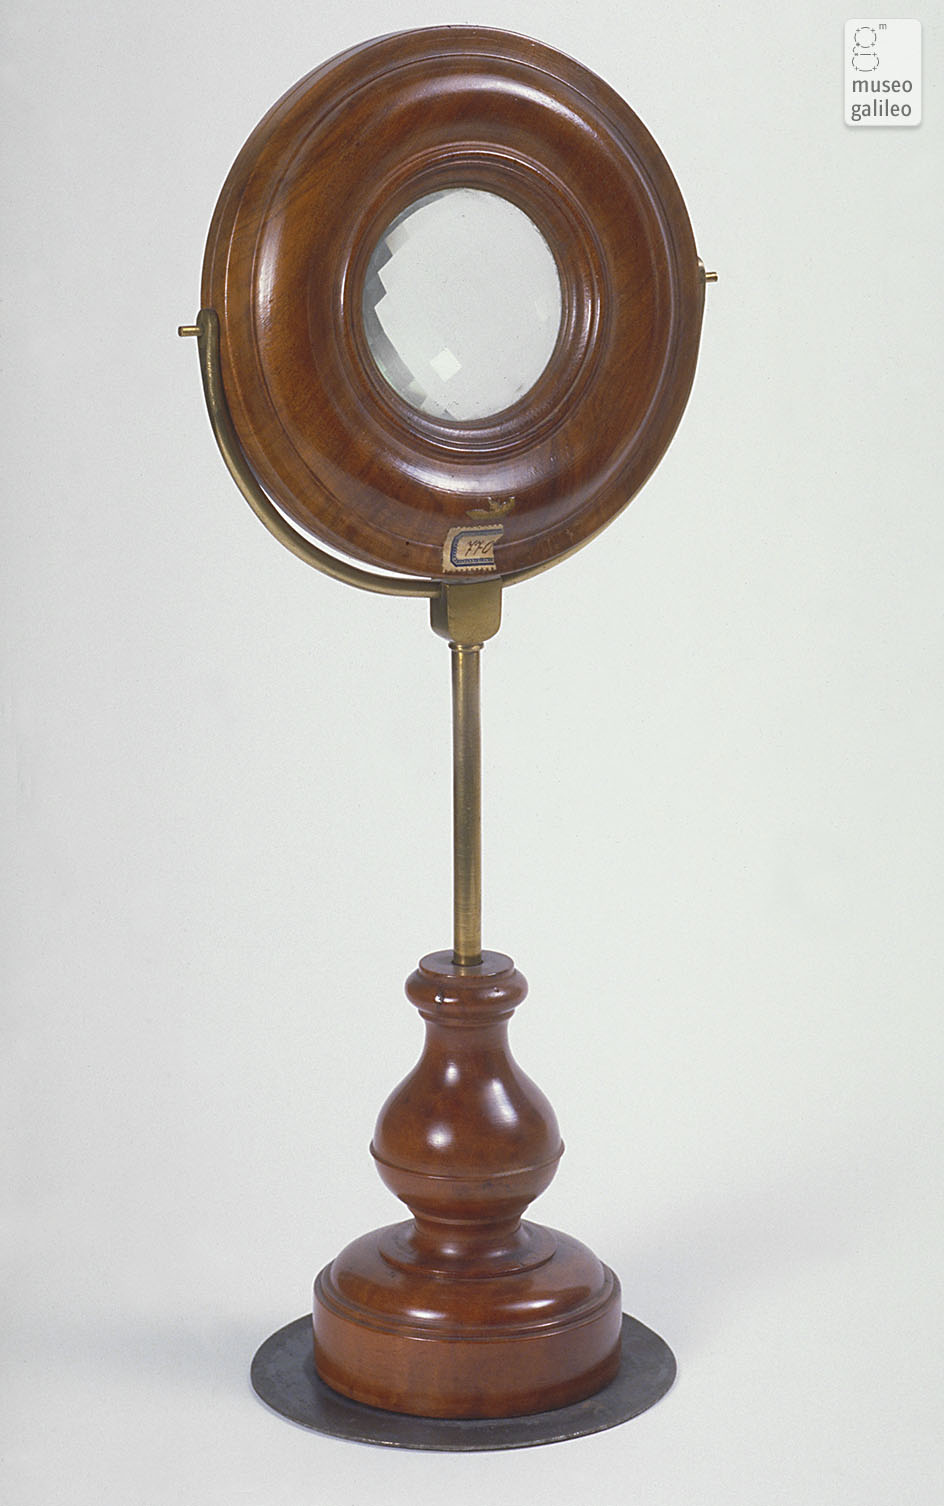 Mounted prismatic lens (Inv. 770)